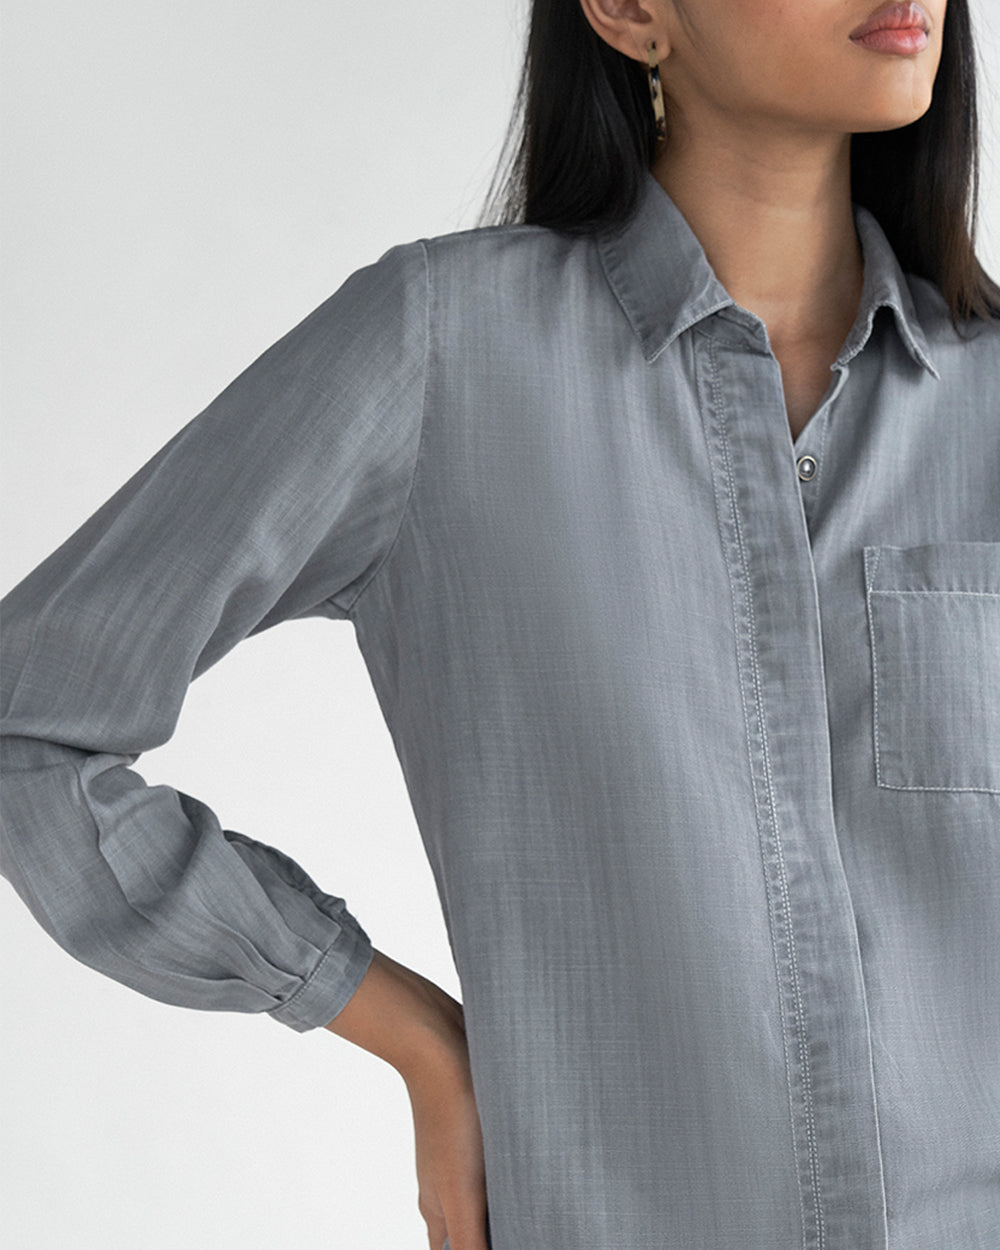 Shades of Everyday Grey Shirt at Kamakhyaa by Reistor. This item is Casual Wear, Denim, Grey, Natural, Solids, Tencel, Tops, Tunic Tops, Womenswear